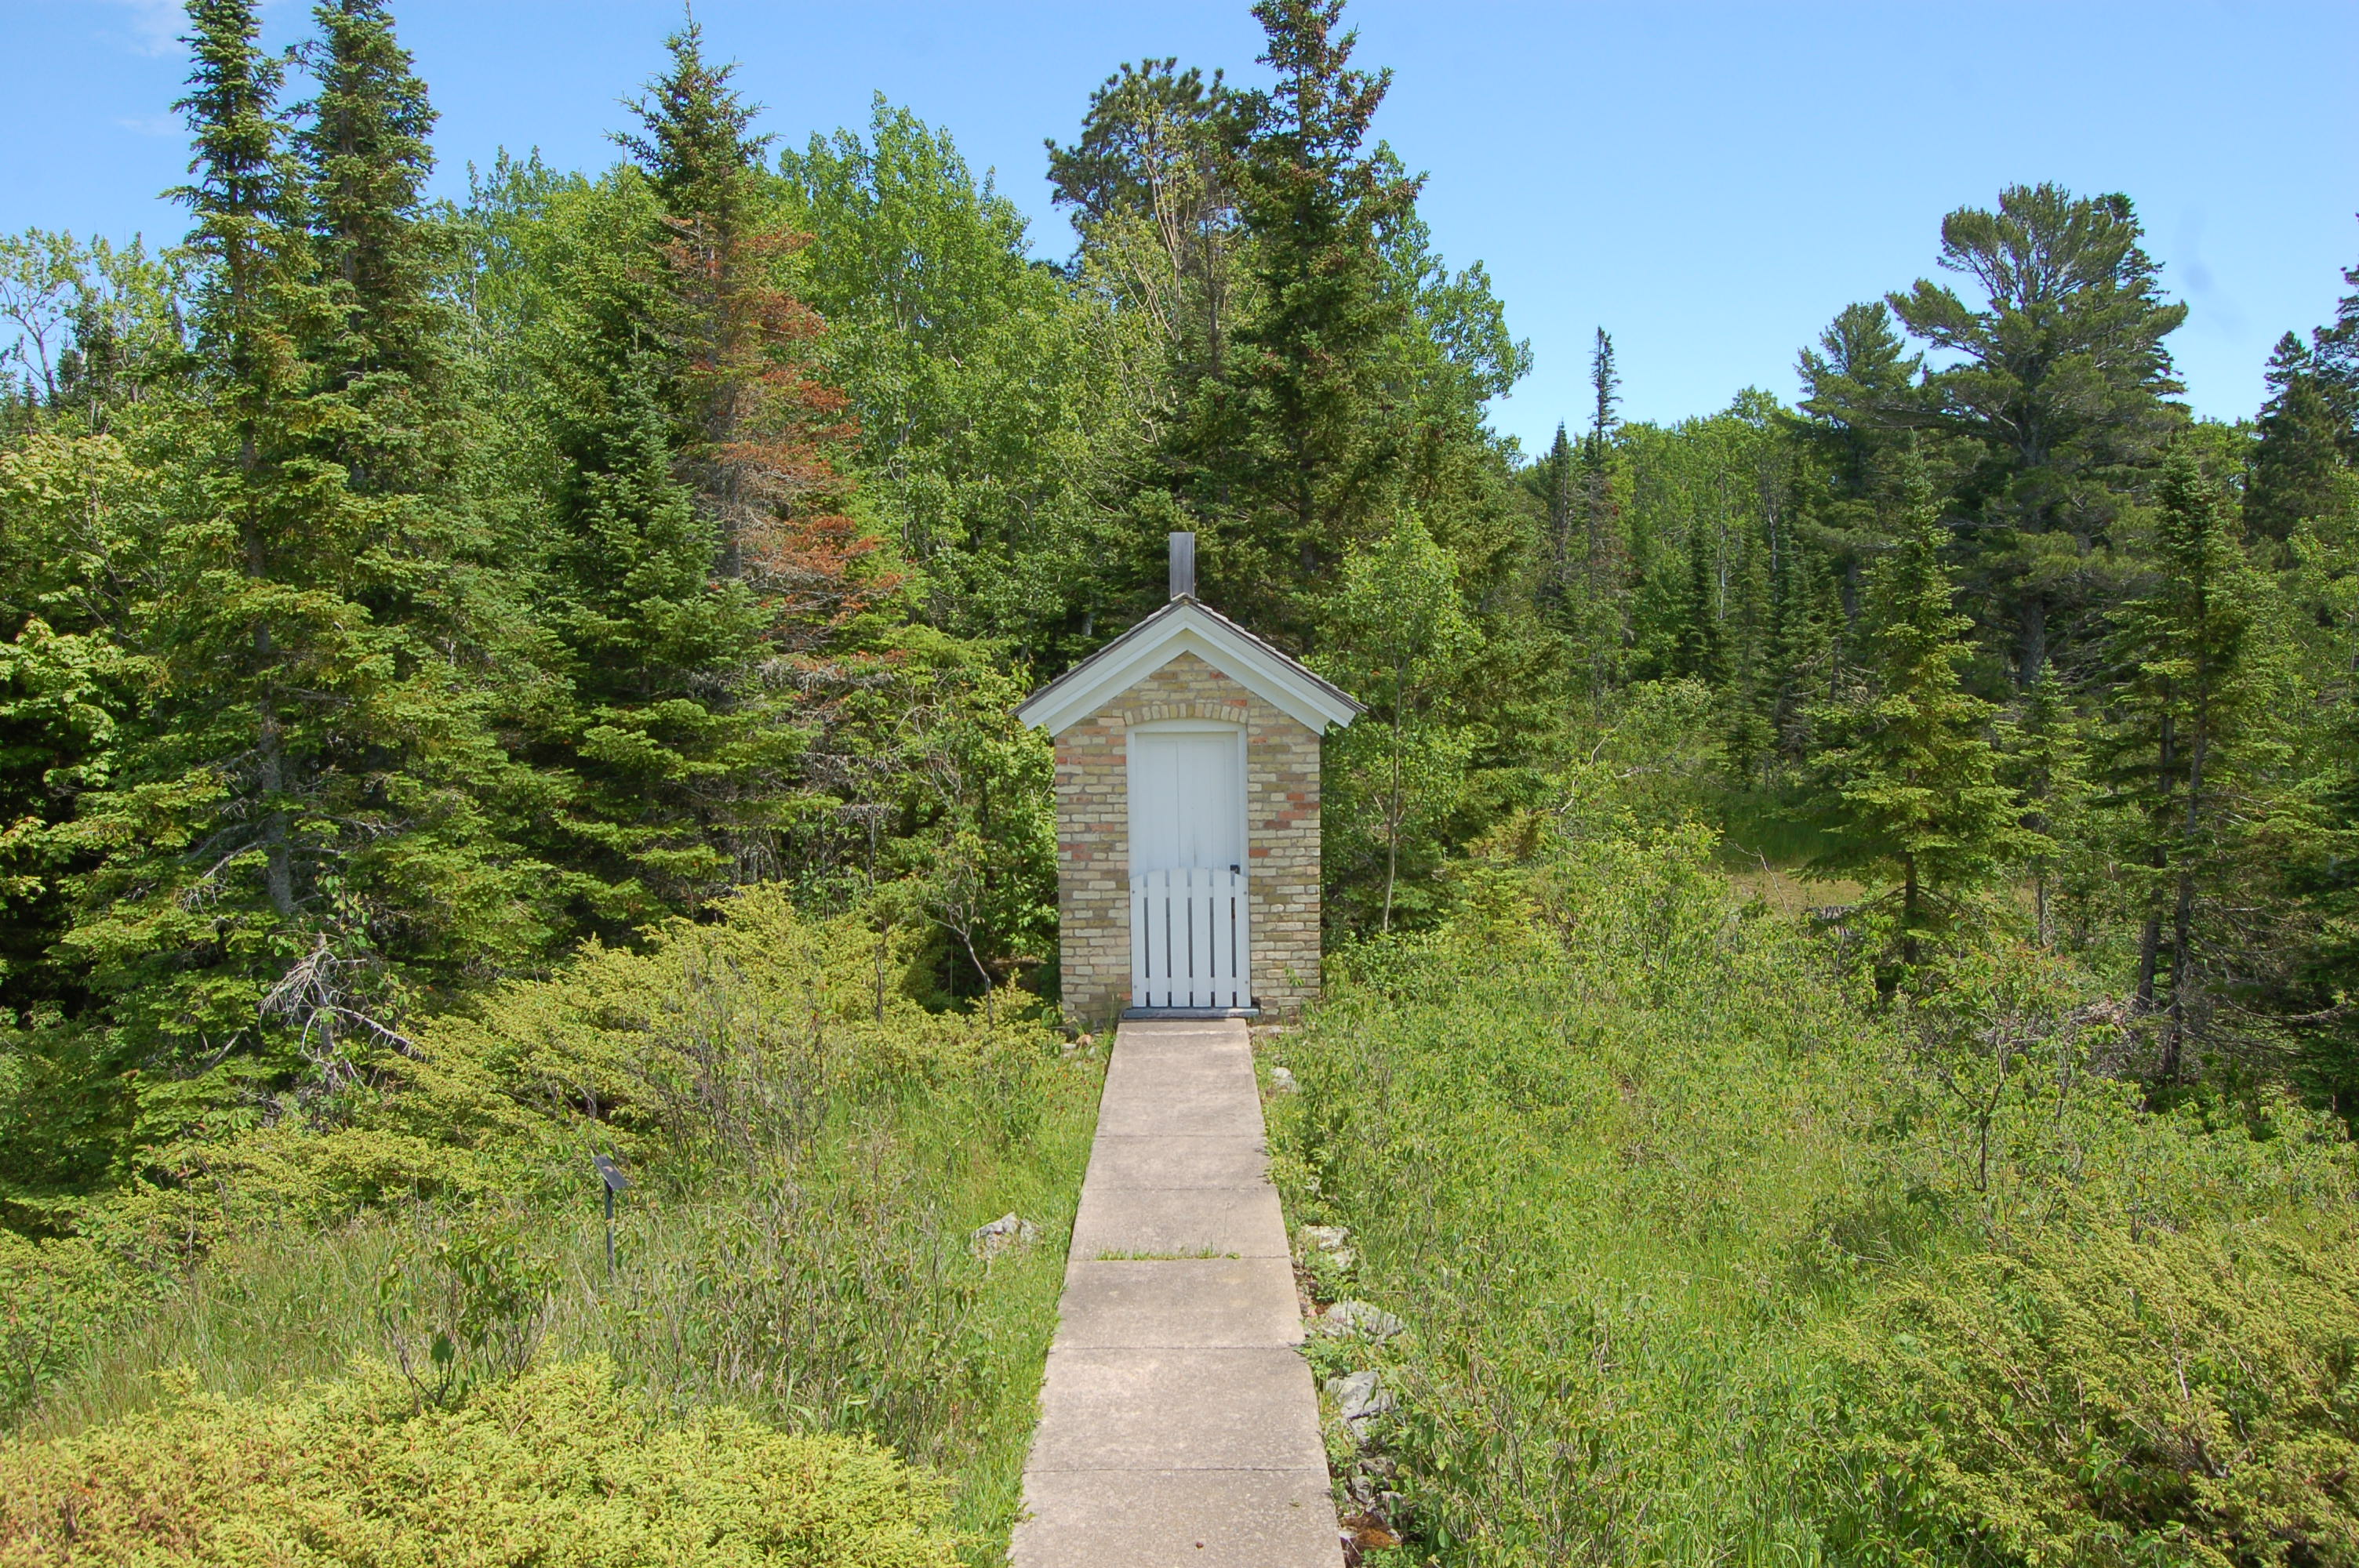 Copper Harbor Lighthouse Outhouse